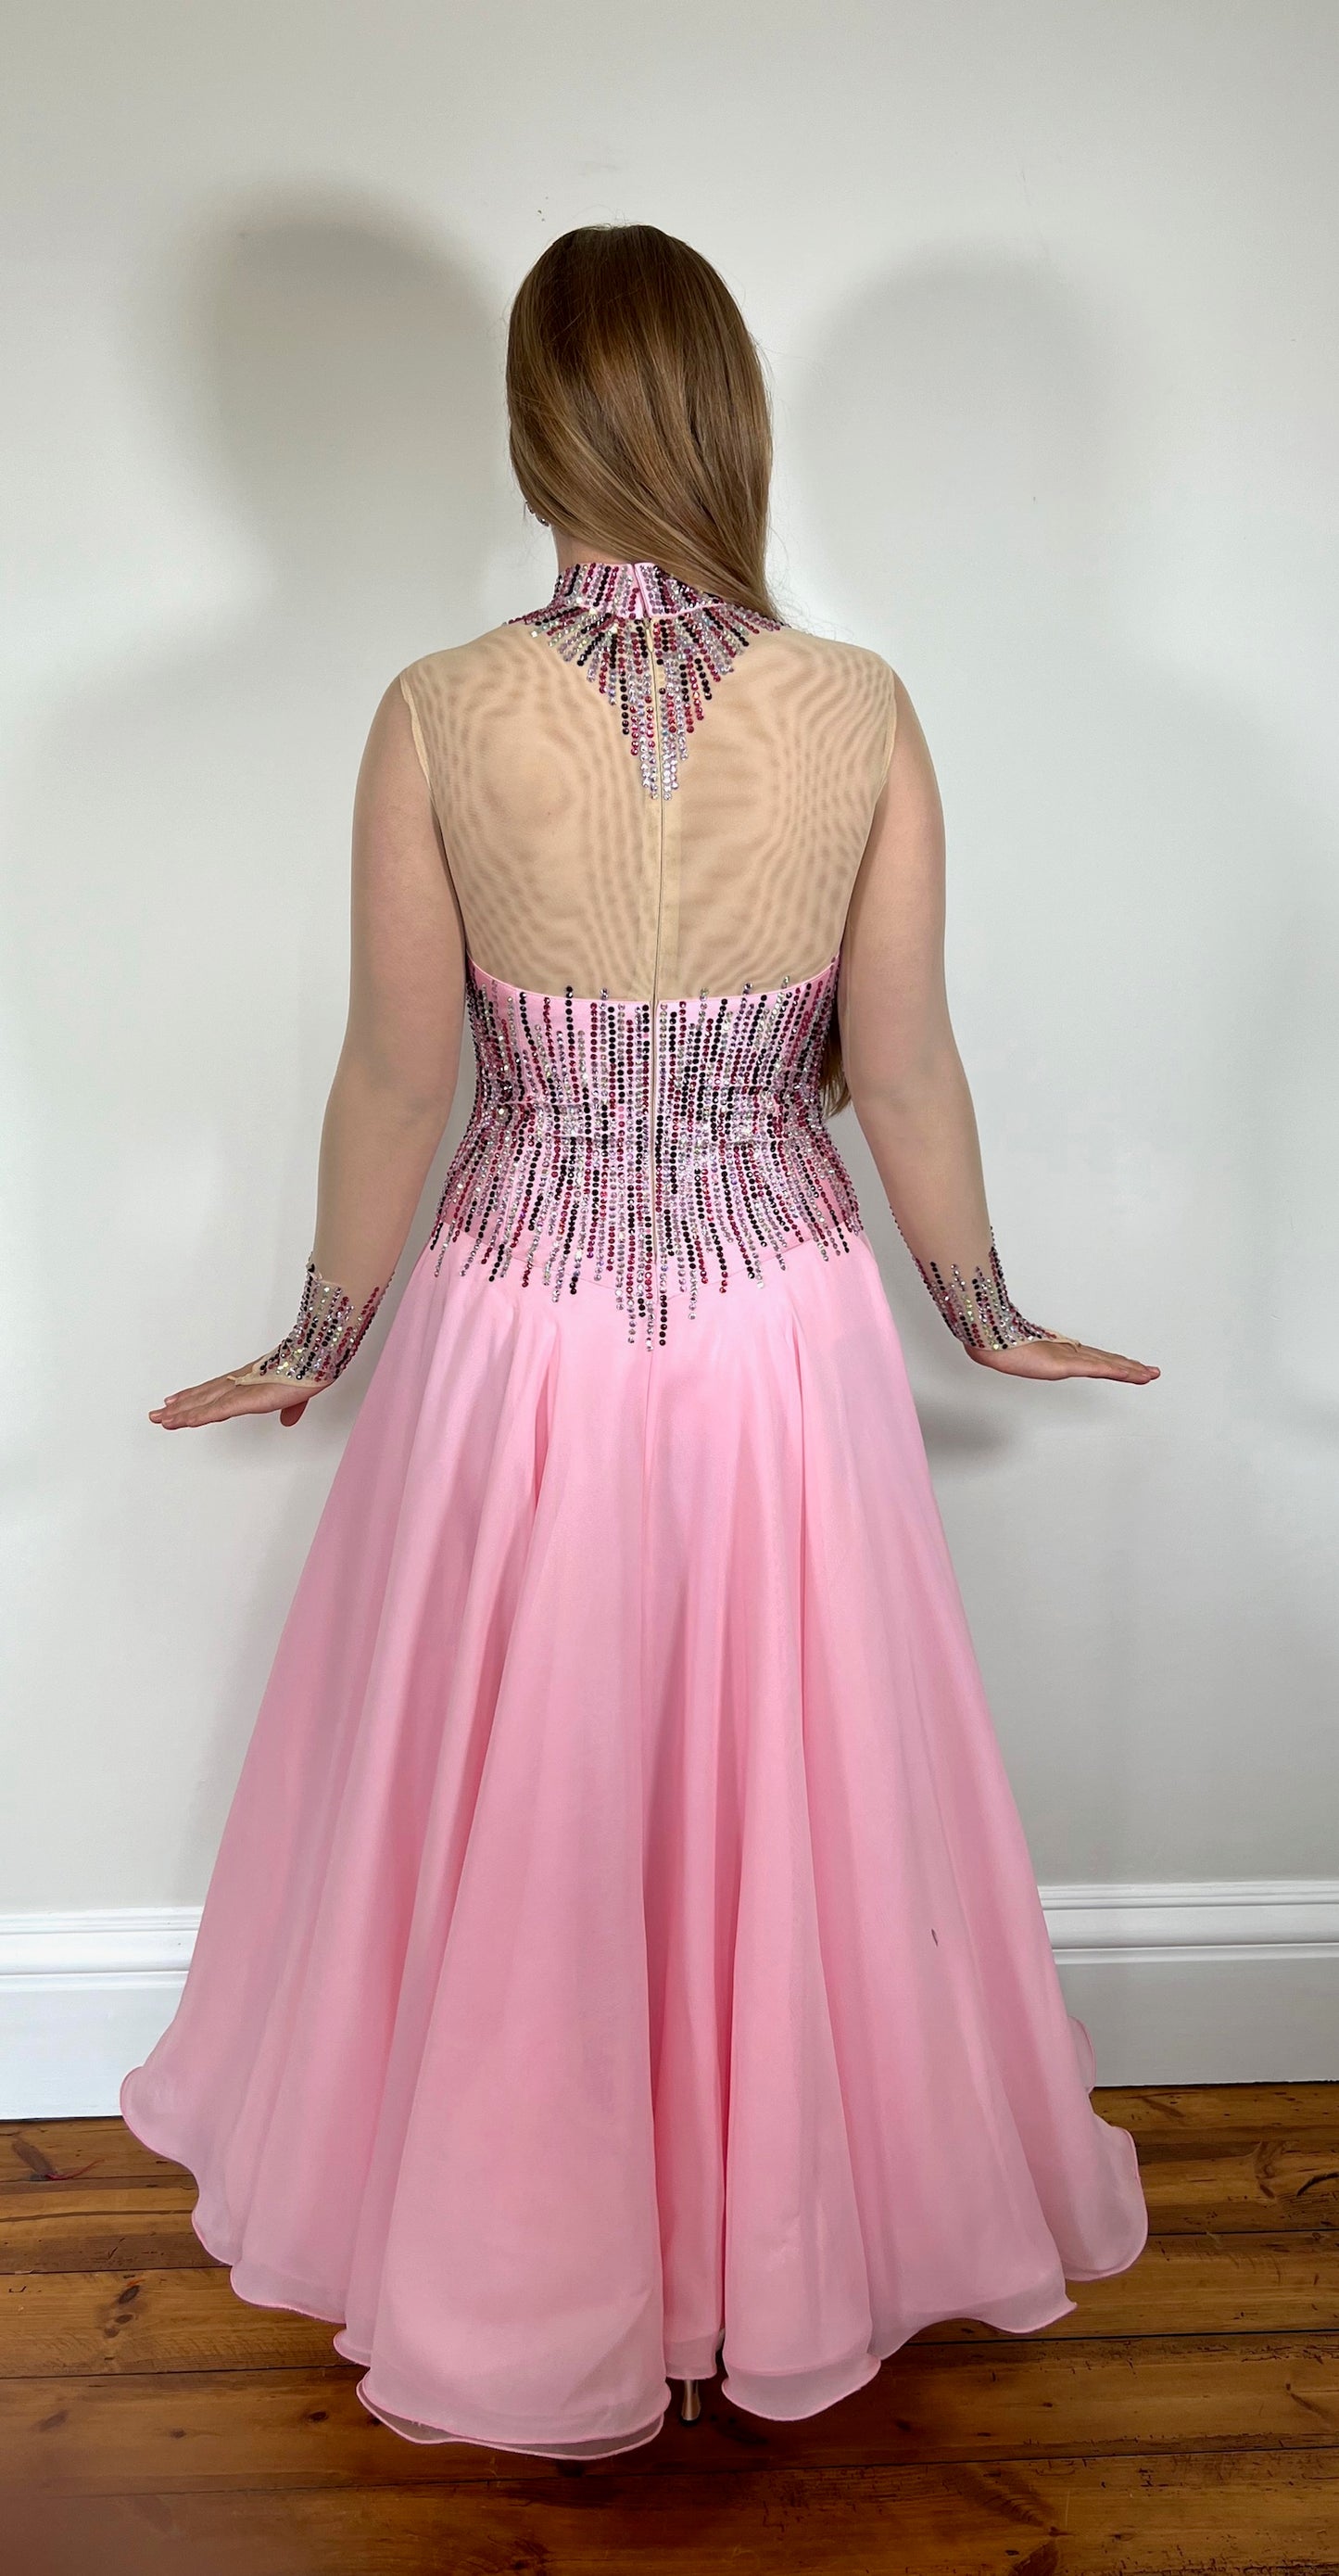 029 Baby Pink High Neck Ballroom Dress decorated with amethyst, Rose, light rose & AB stones. Stoned necklace decoration to the neck with high back detail.